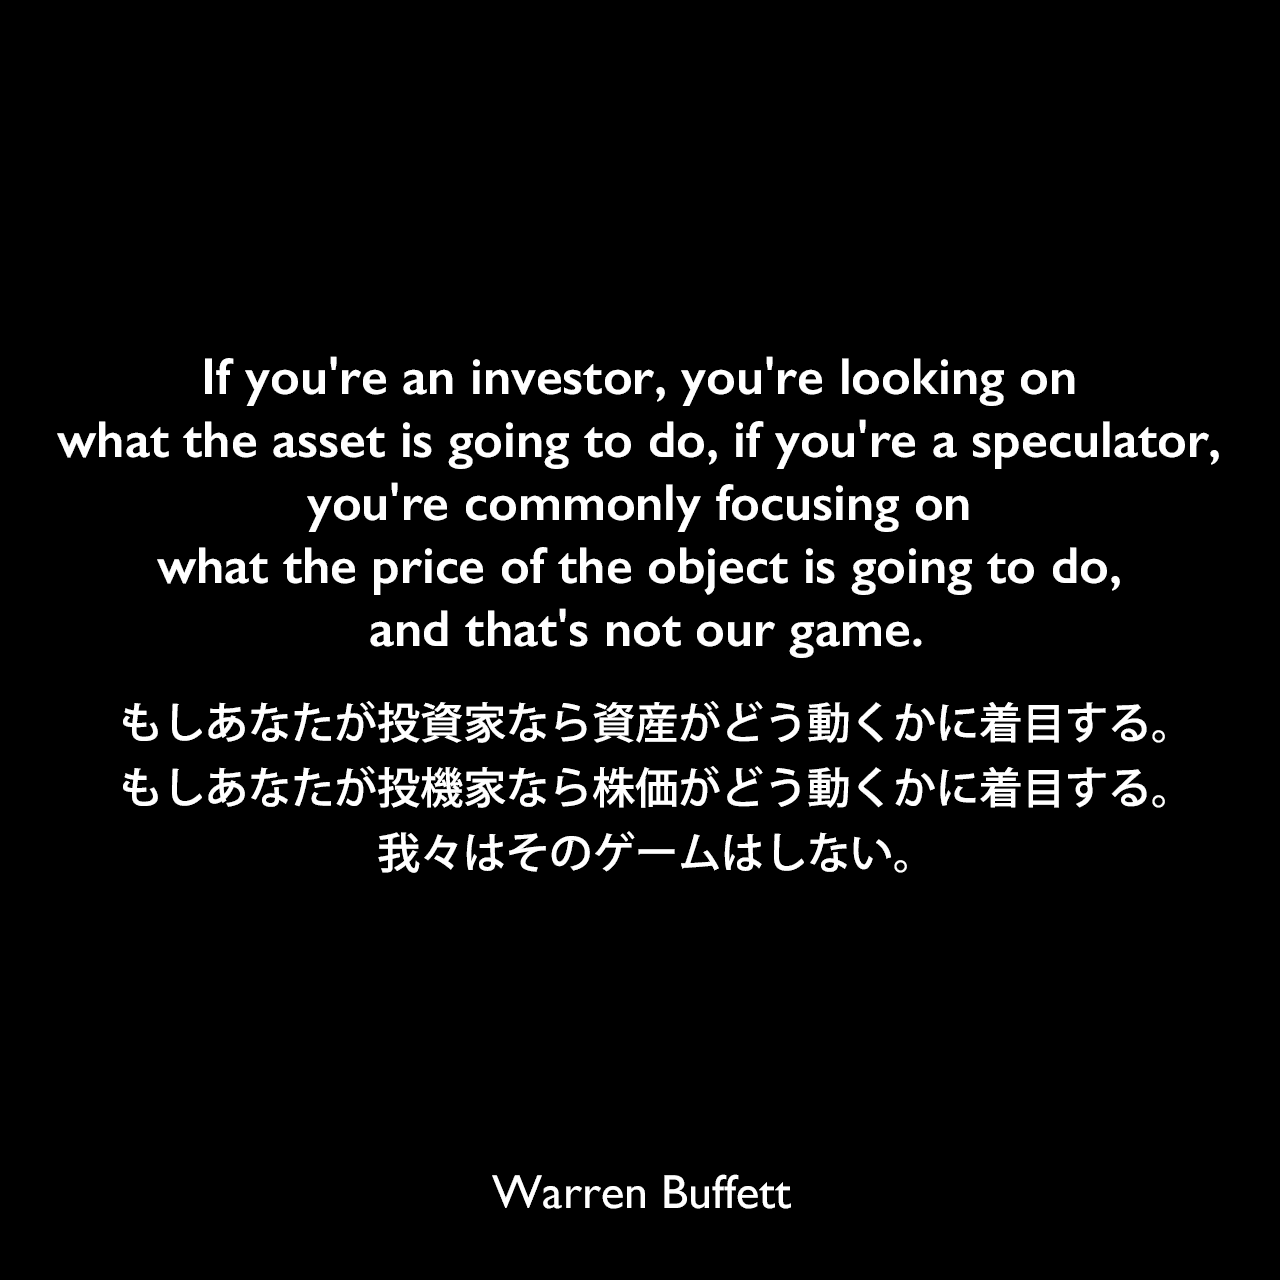 If you're an investor, you're looking on what the asset is going to do, if you're a speculator, you're commonly focusing on what the price of the object is going to do, and that's not our game.もしあなたが投資家なら資産がどう動くかに着目する。もしあなたが投機家なら株価がどう動くかに着目する。我々はそのゲームはしない。Warren Buffett